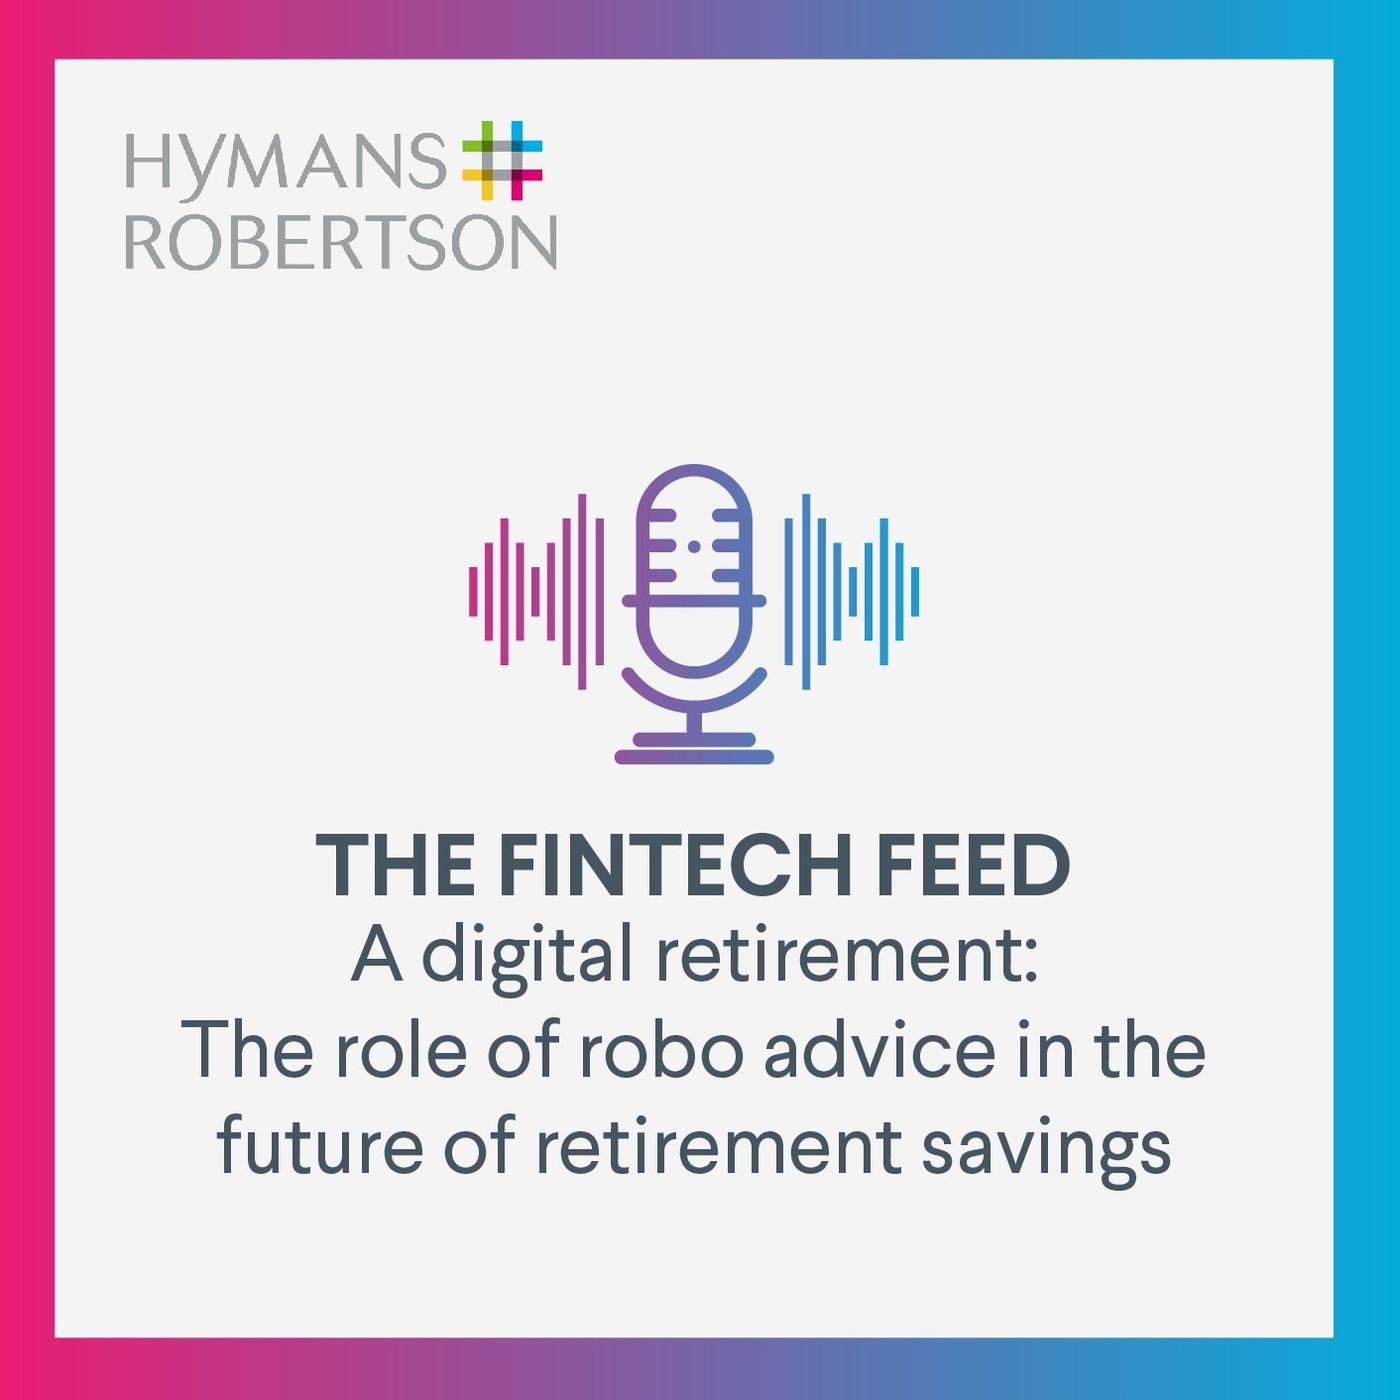 A digital retirement : The role of robo advice in the future of retirement savings